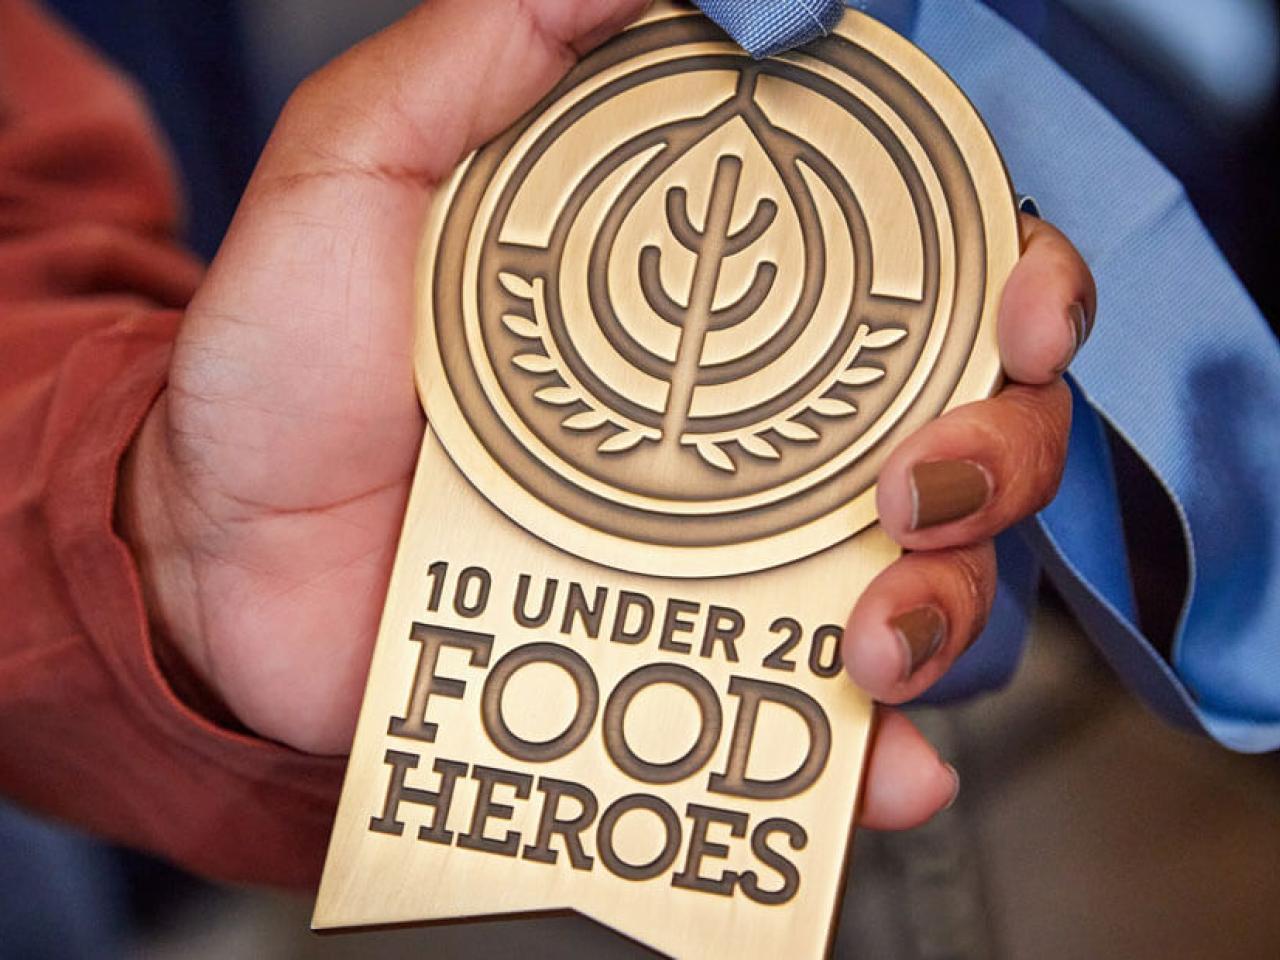 A hand holding a medal "10 Under 20 Food Heroes".